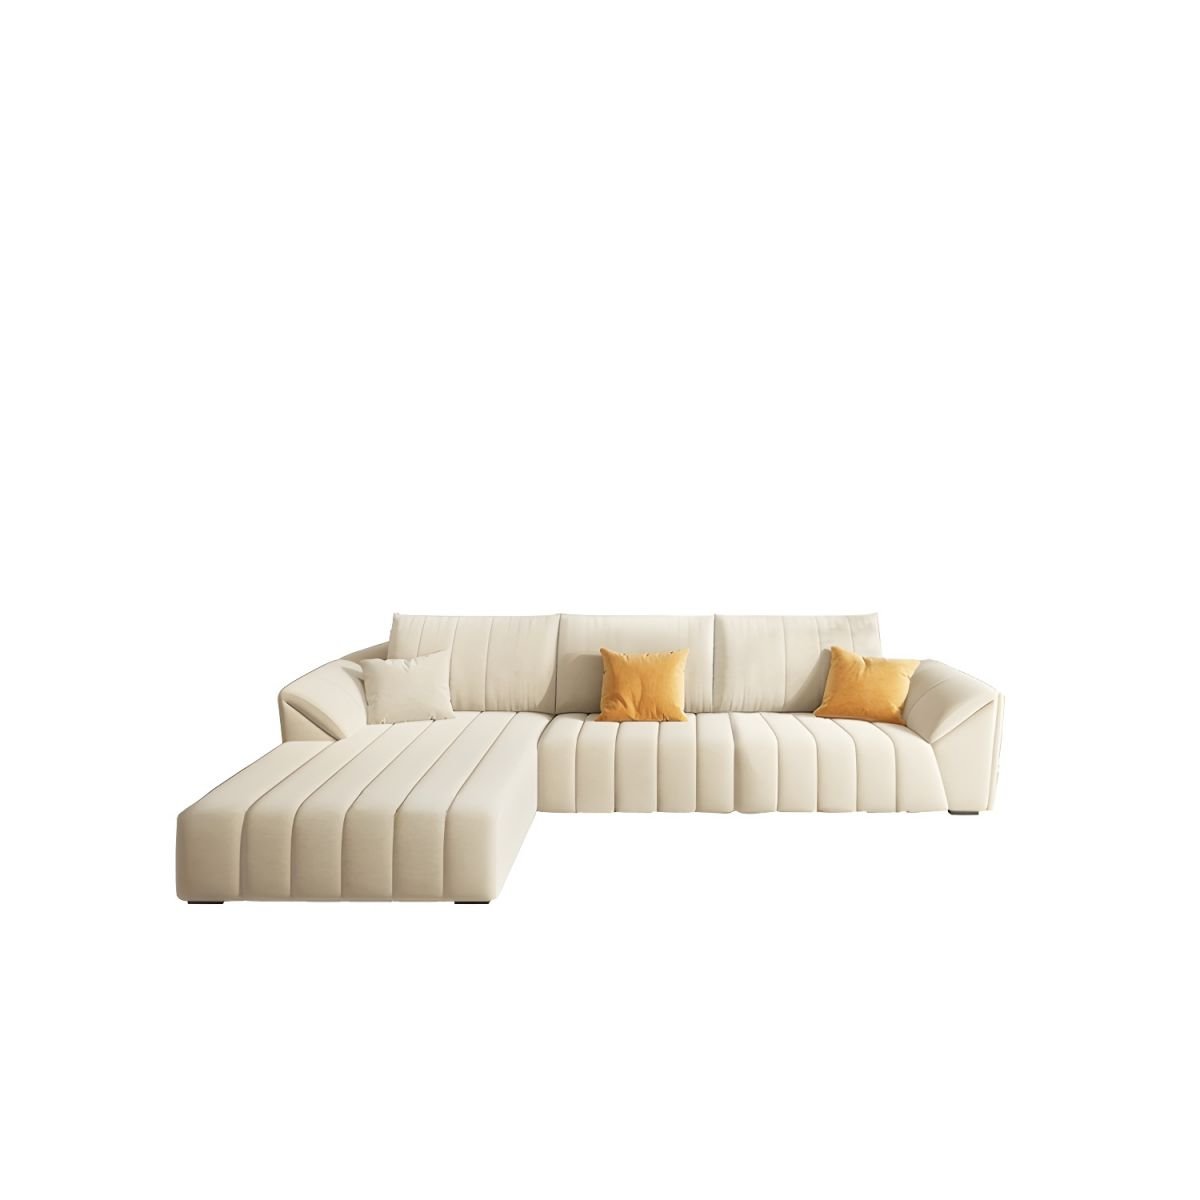 Contemporary Off-White L-Shaped Sofa & Chaise with Bolster Pillows - 115"L x 71"W x 37"H Milk Fleece Left